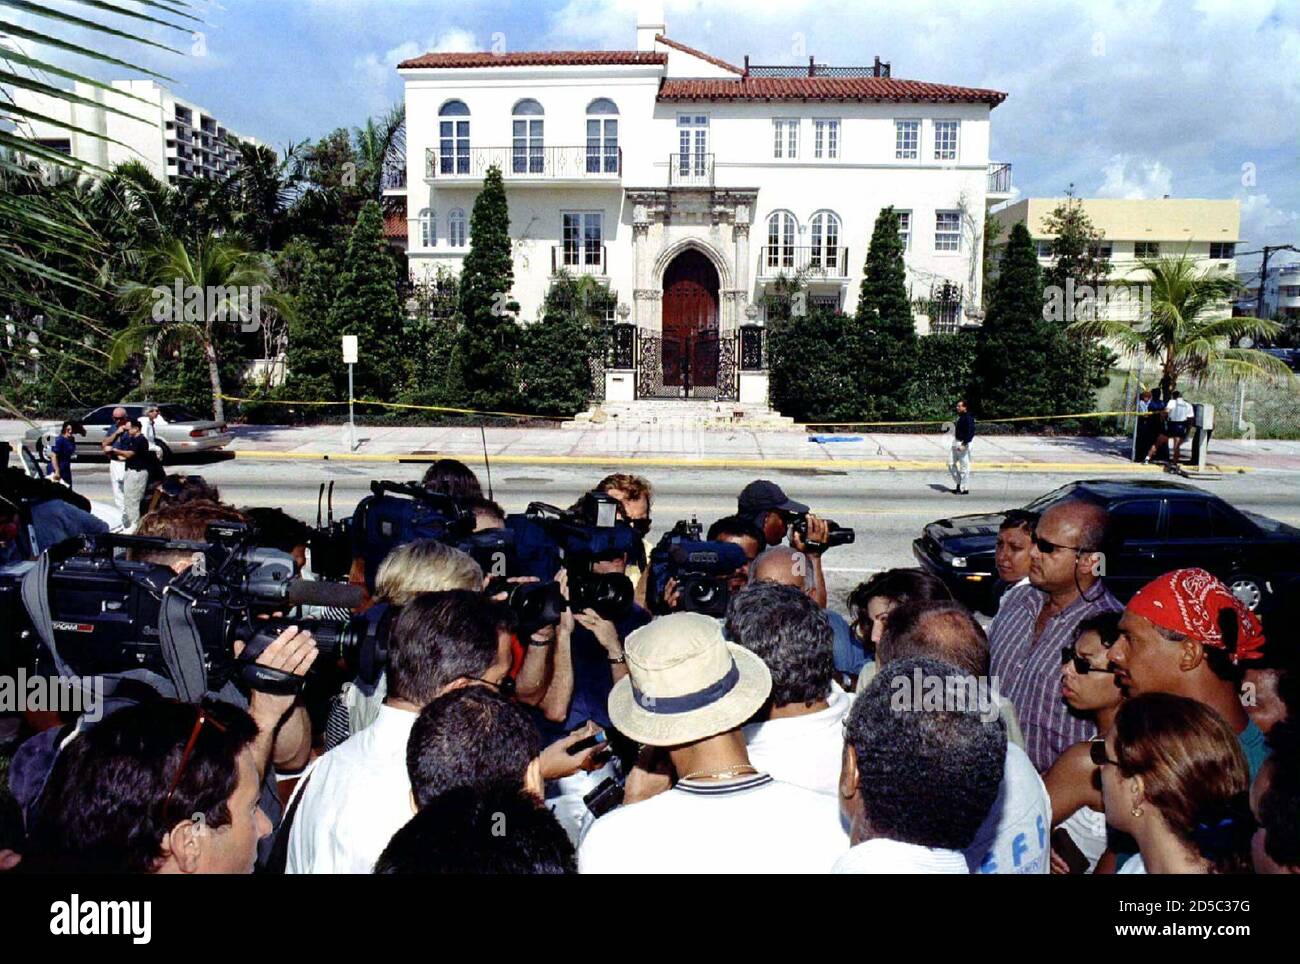 Members Of The Media Cover A News Conference July 15 In Front Of The Home Of Fashion Designer Gianni Versace Who Was Shot And Killed In Front Of The Residence Earlier Today